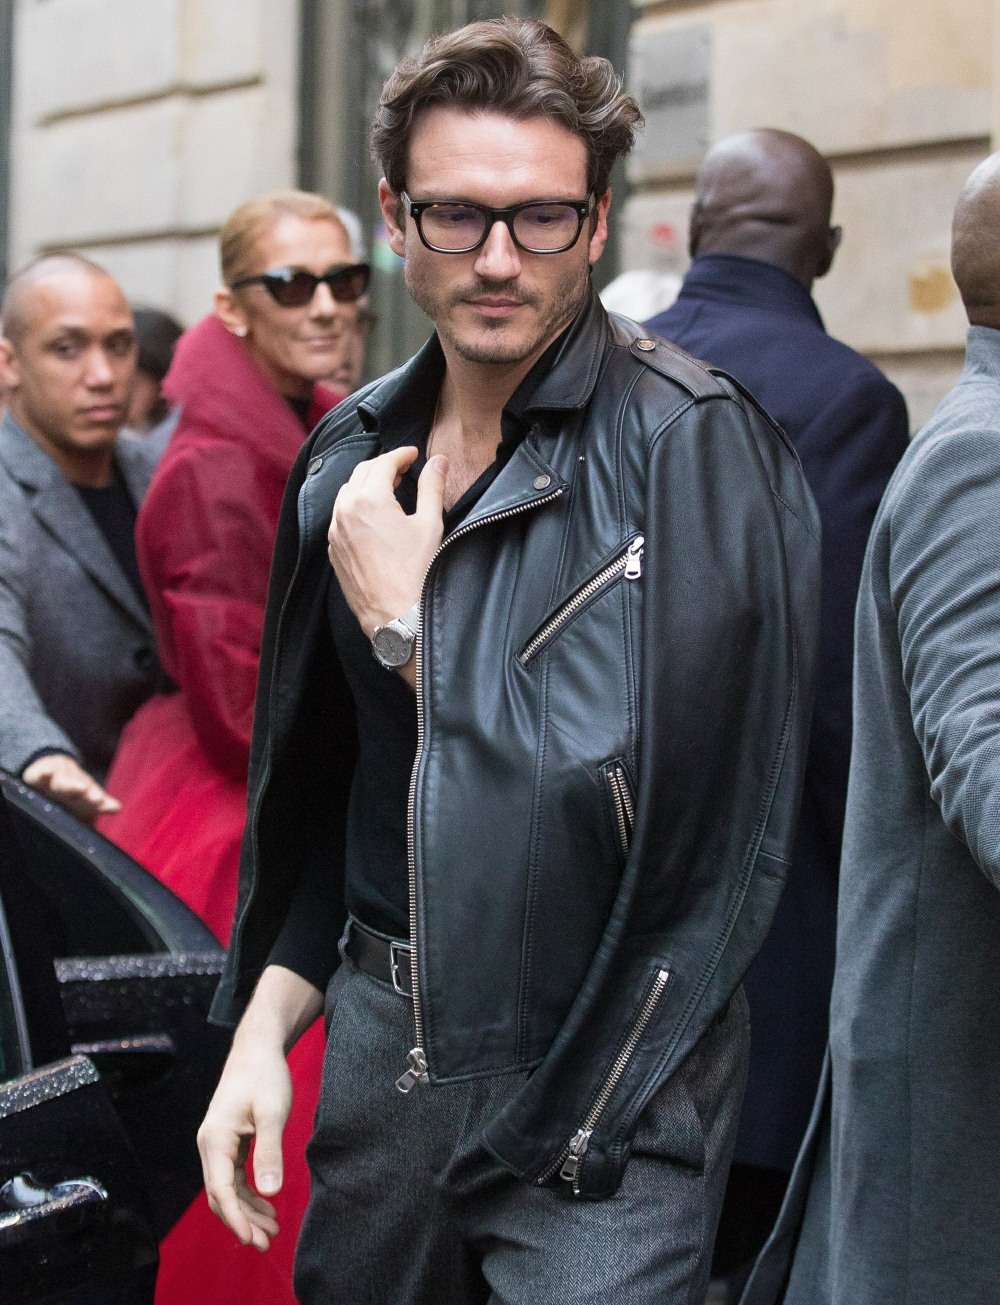 Celine Dion and Pepe Munoz arrive at the Mogador Theater to attend the Chicago musical in Paris